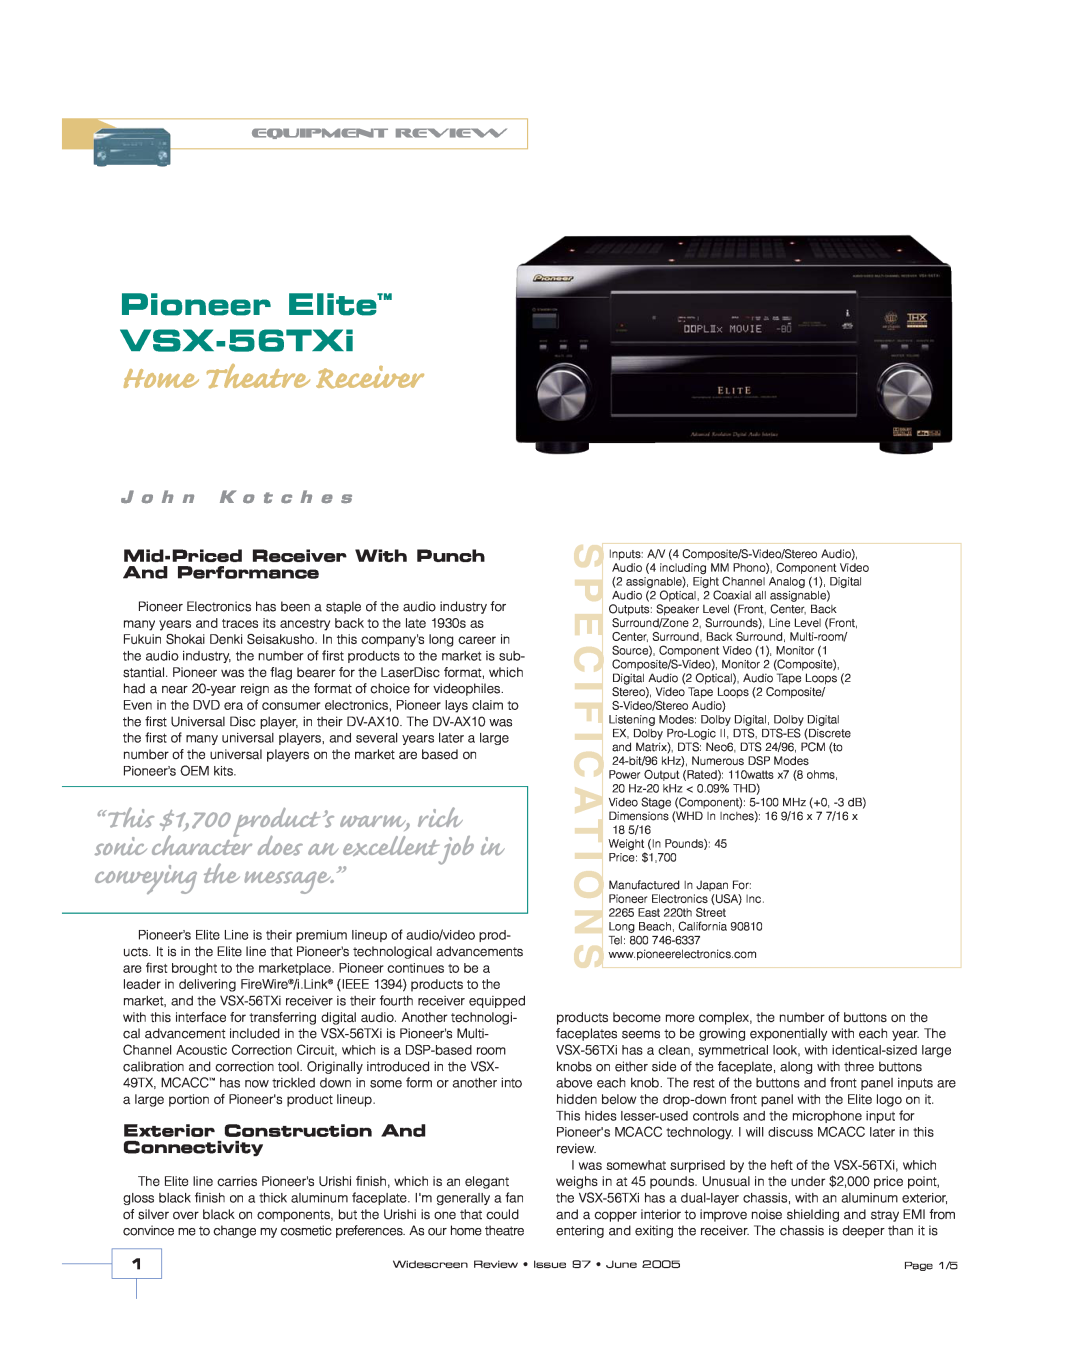 Pioneer VSX-56TXi specifications Mid-Priced Receiver With Punch And Performance, Exterior Construction And Connectivity 